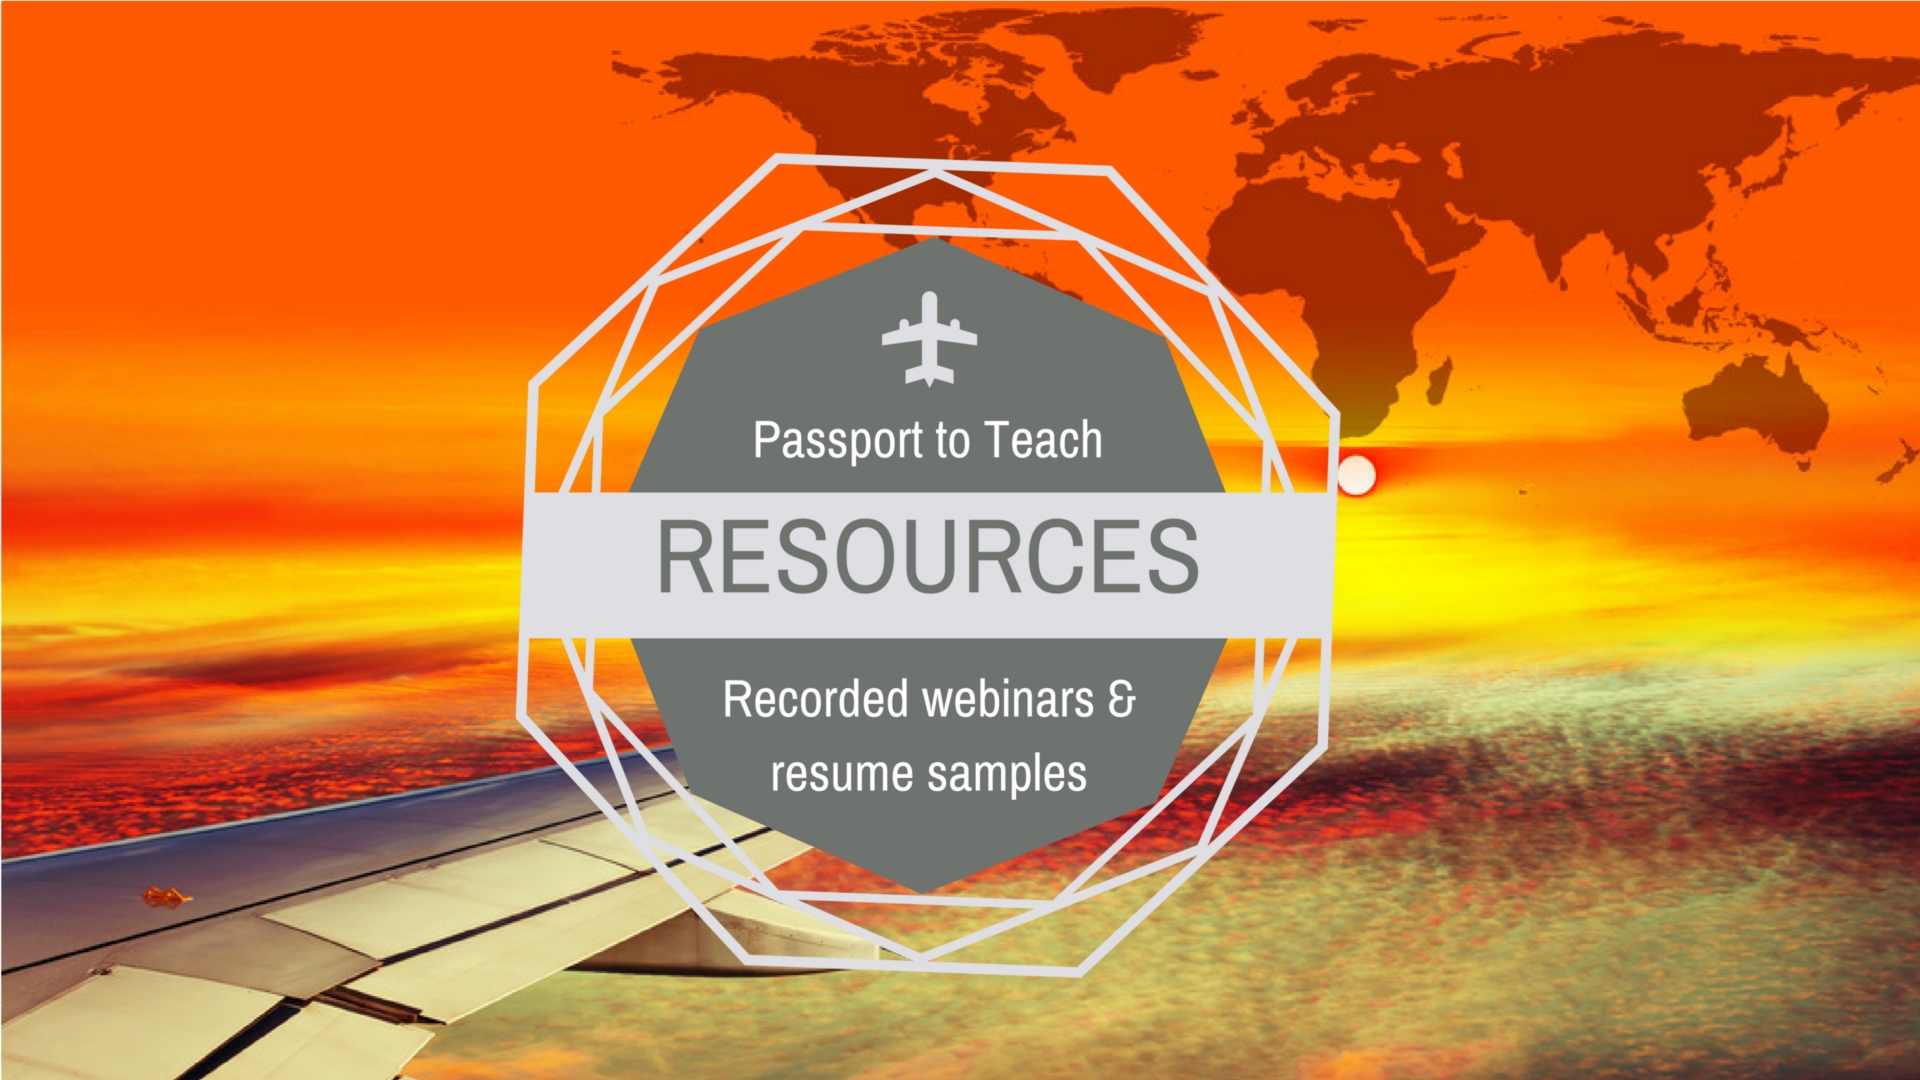 Passport to Teach Resources: Recorded webinars and resume samples